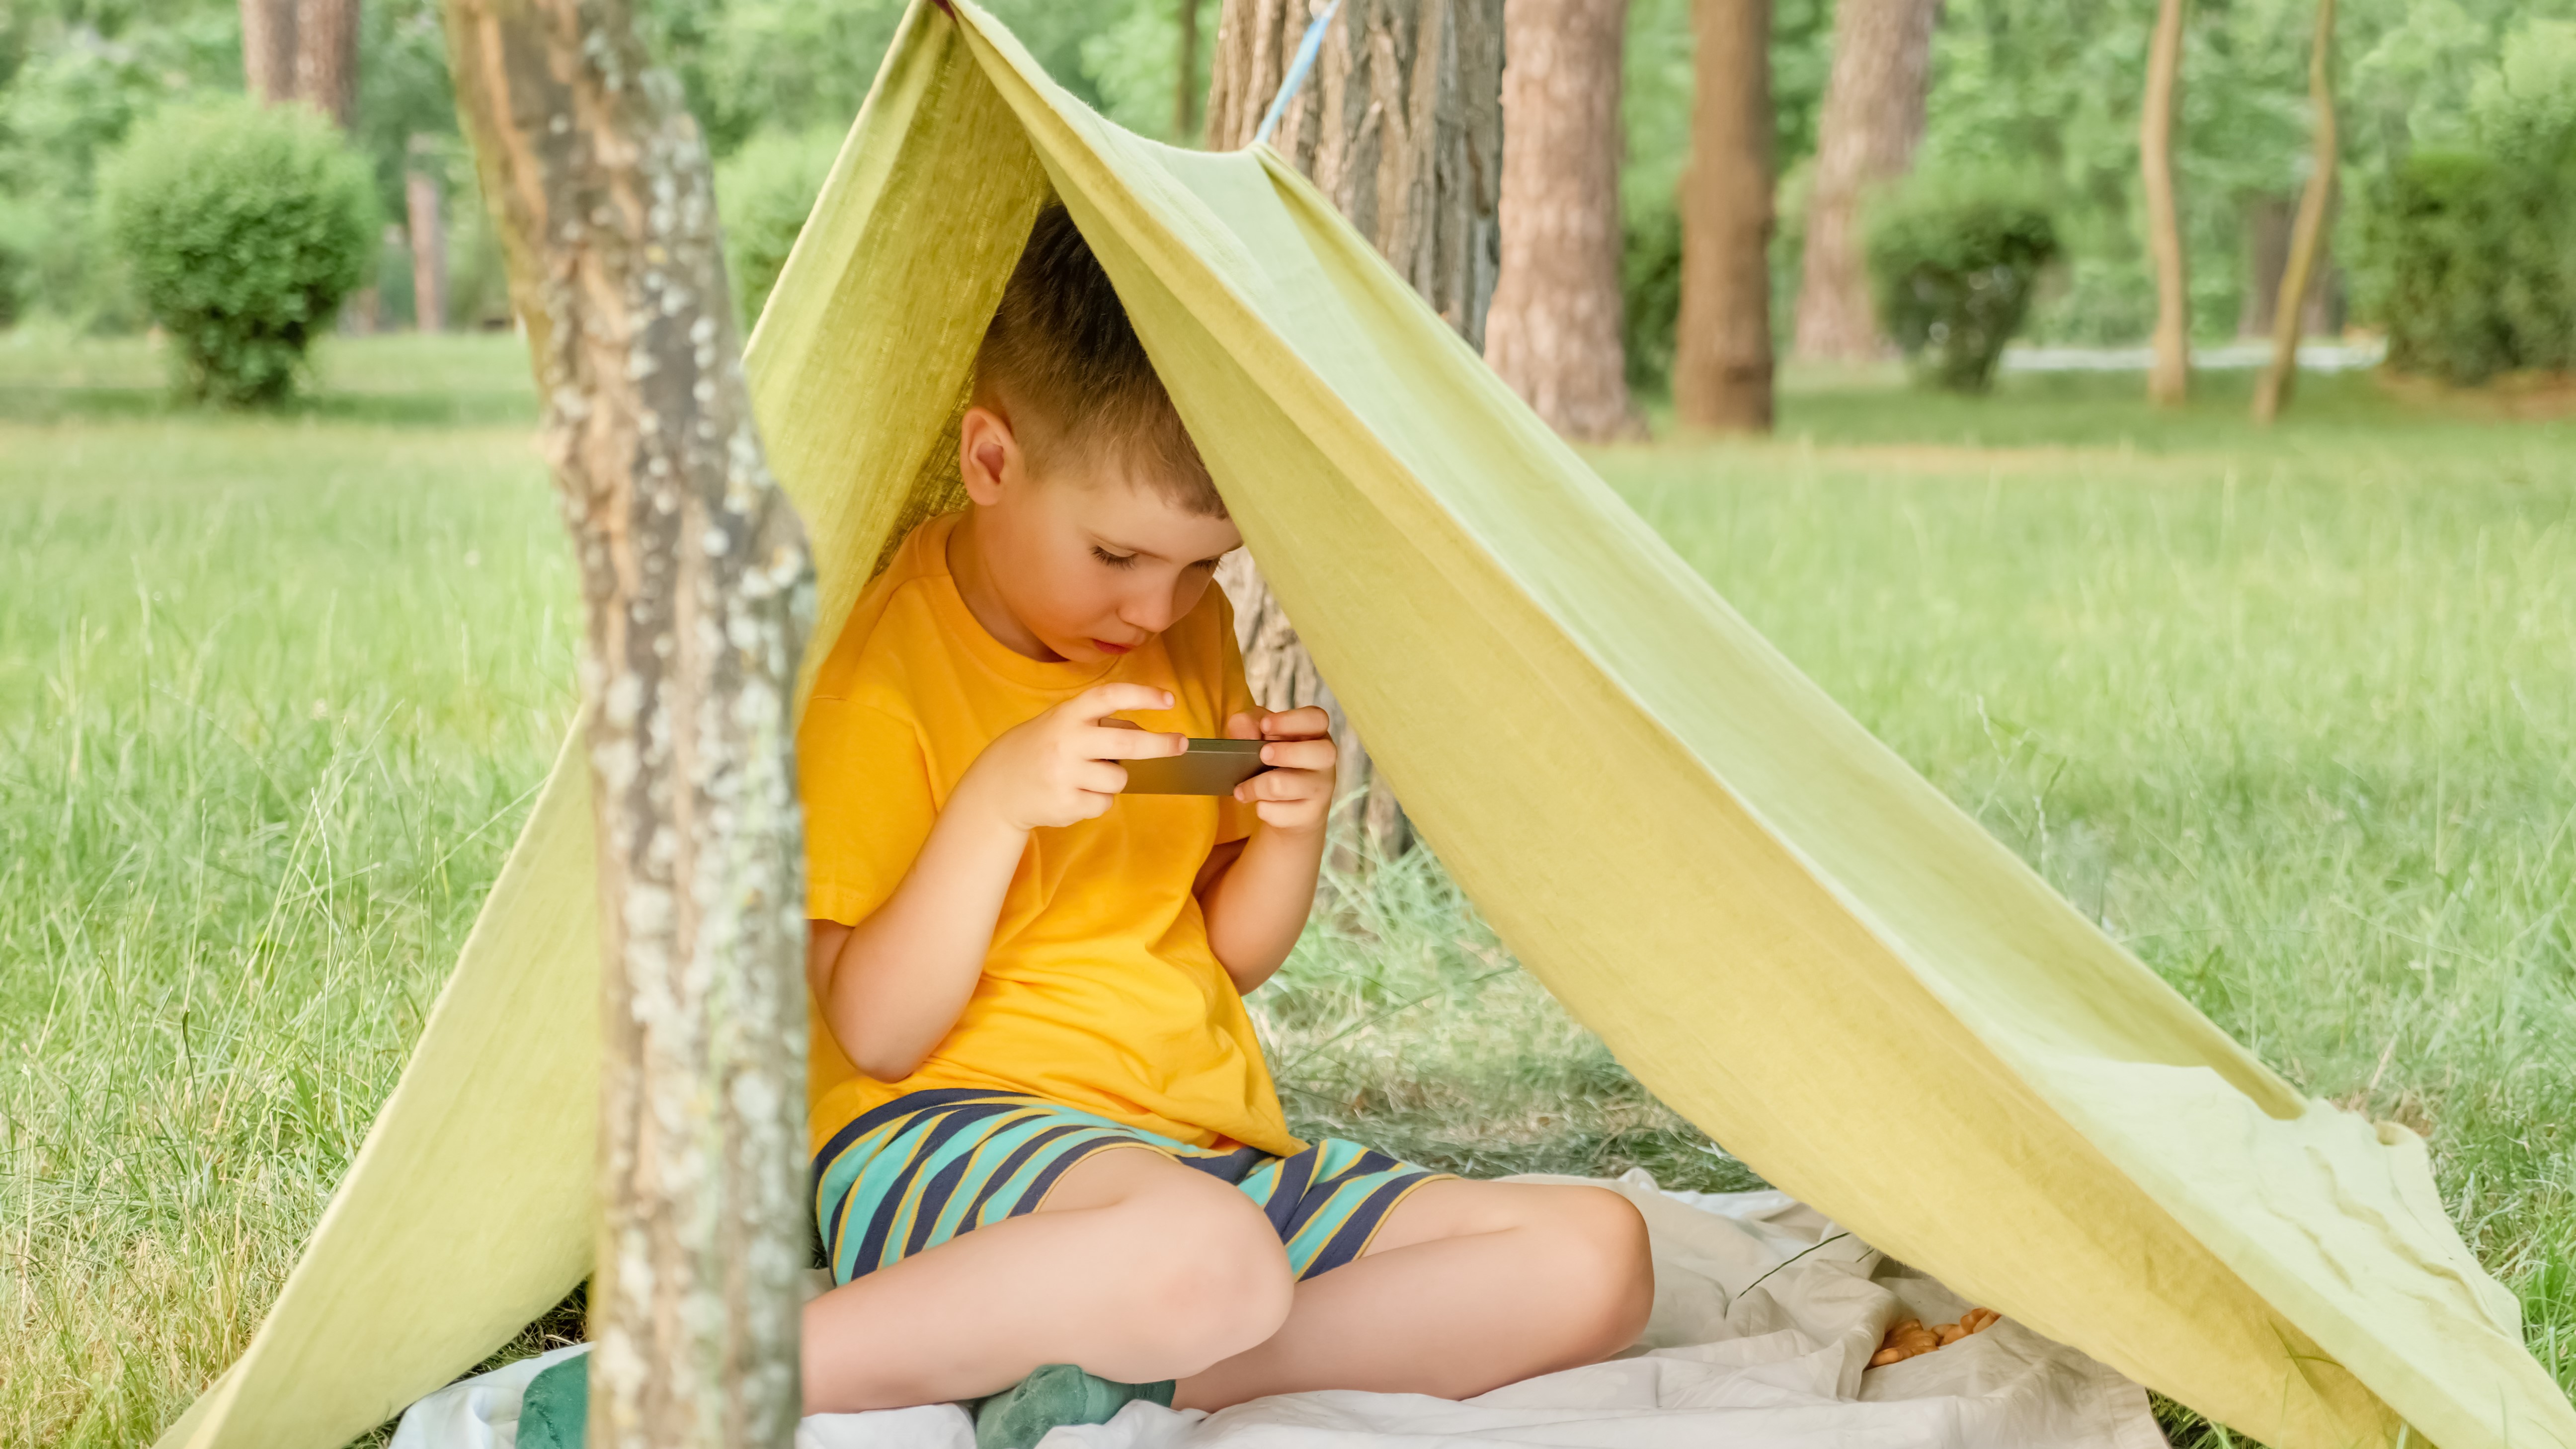 A young child watching Netflix on their phone while sitting in a makeshift tent in the forest